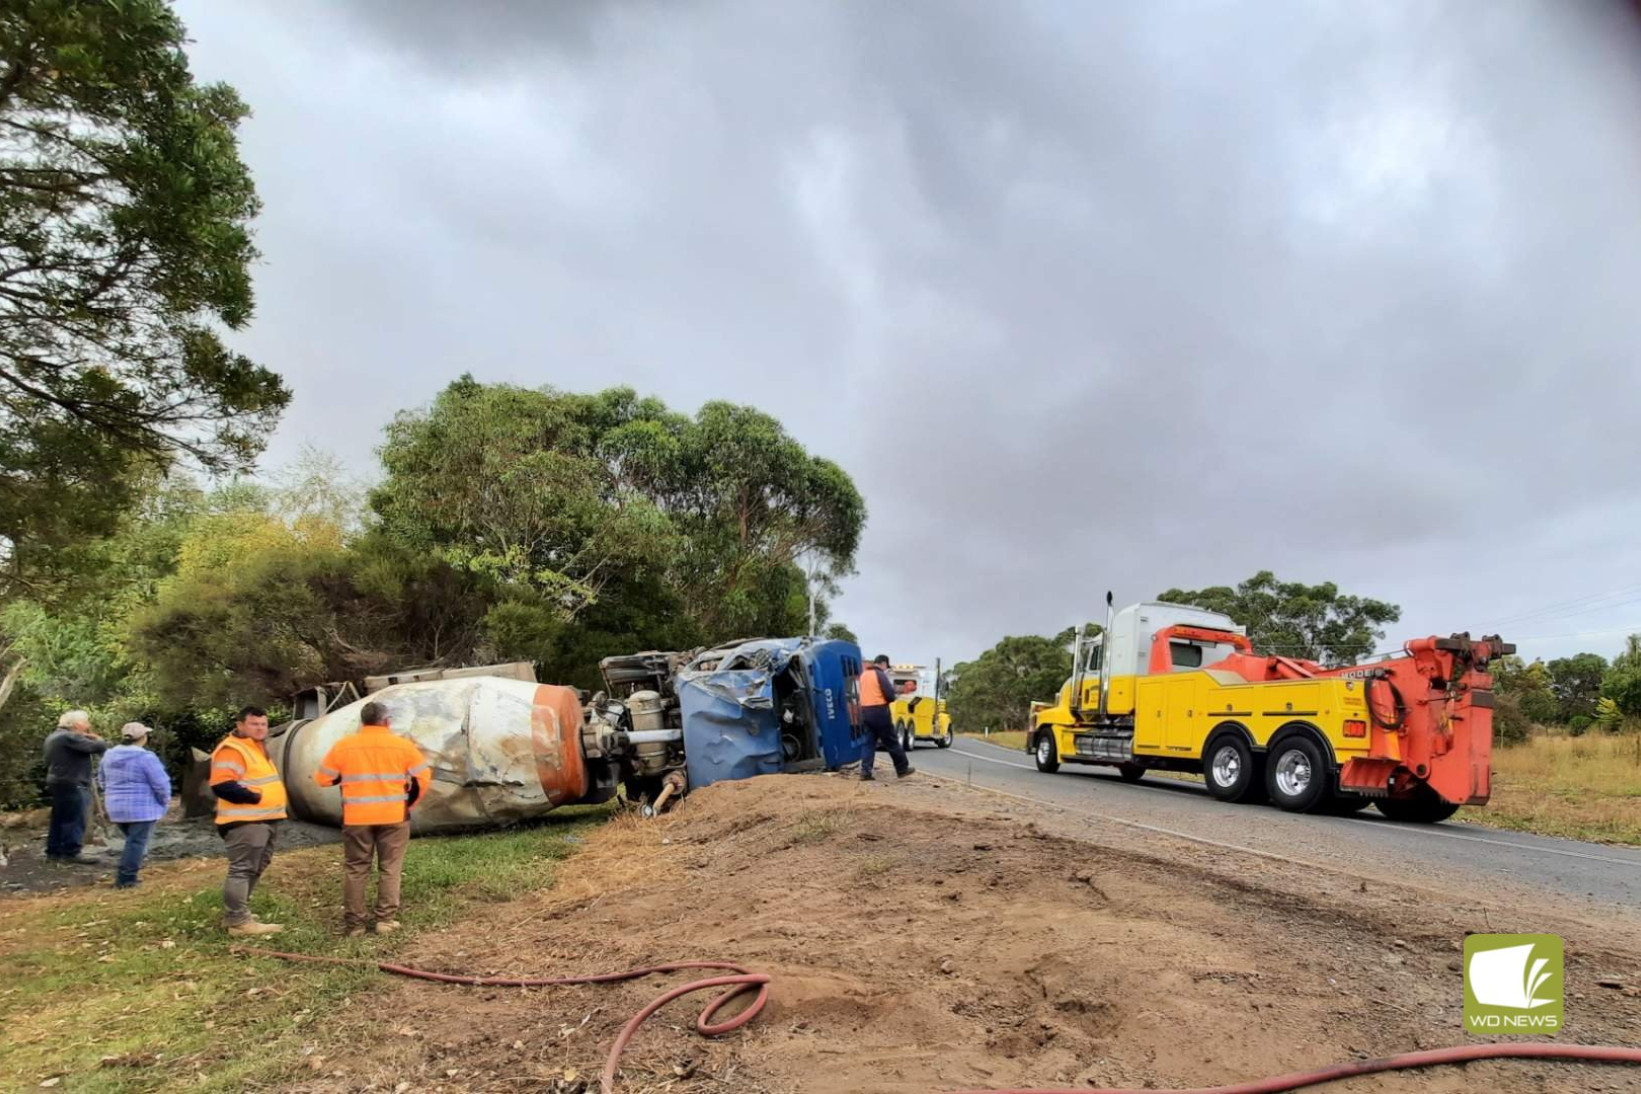 Cement truck rollover - feature photo